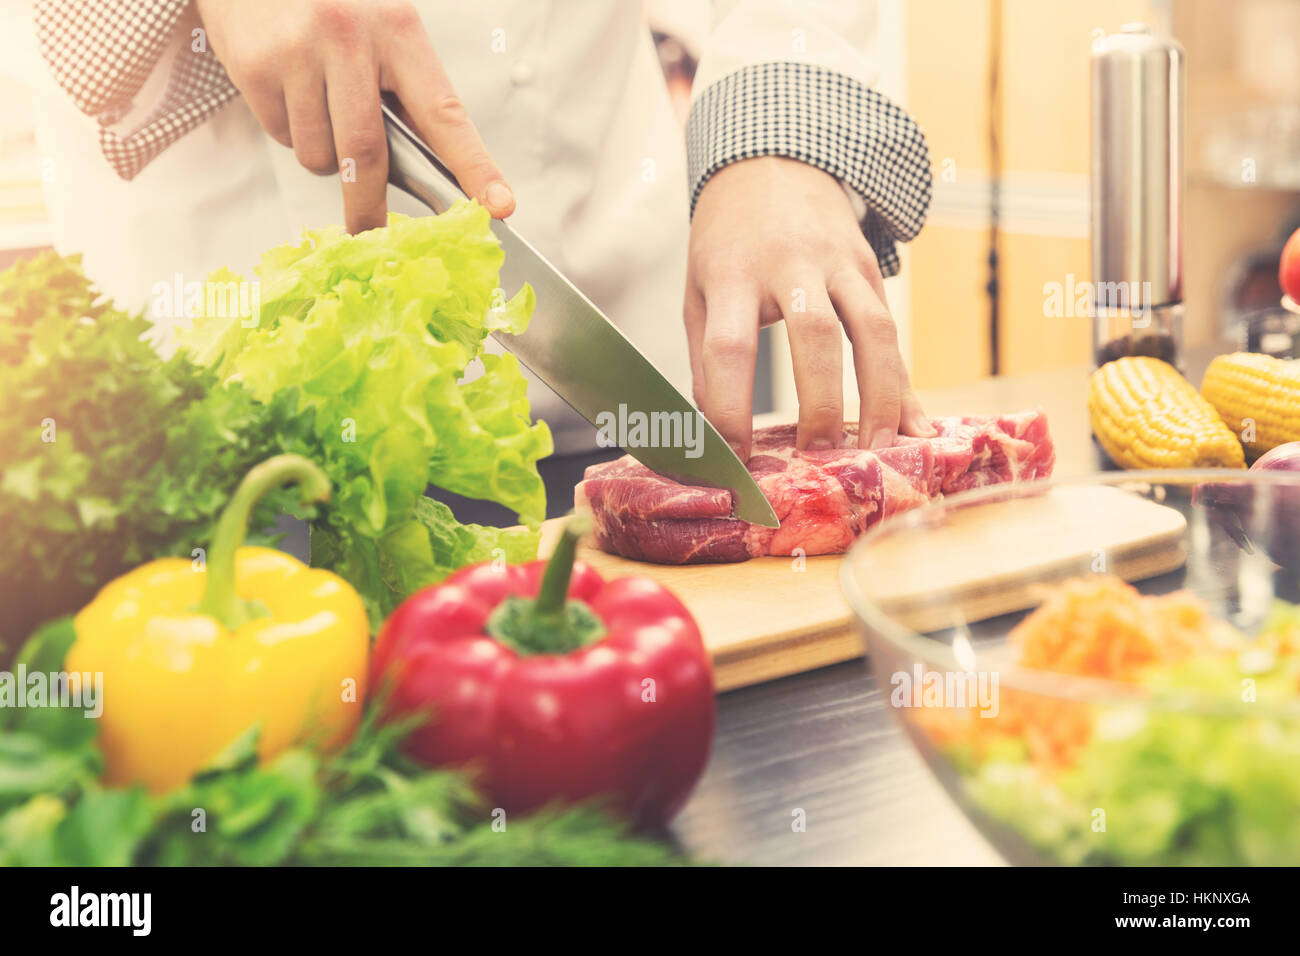 chef cutting raw meat on wooden board in kitchen Stock Photo